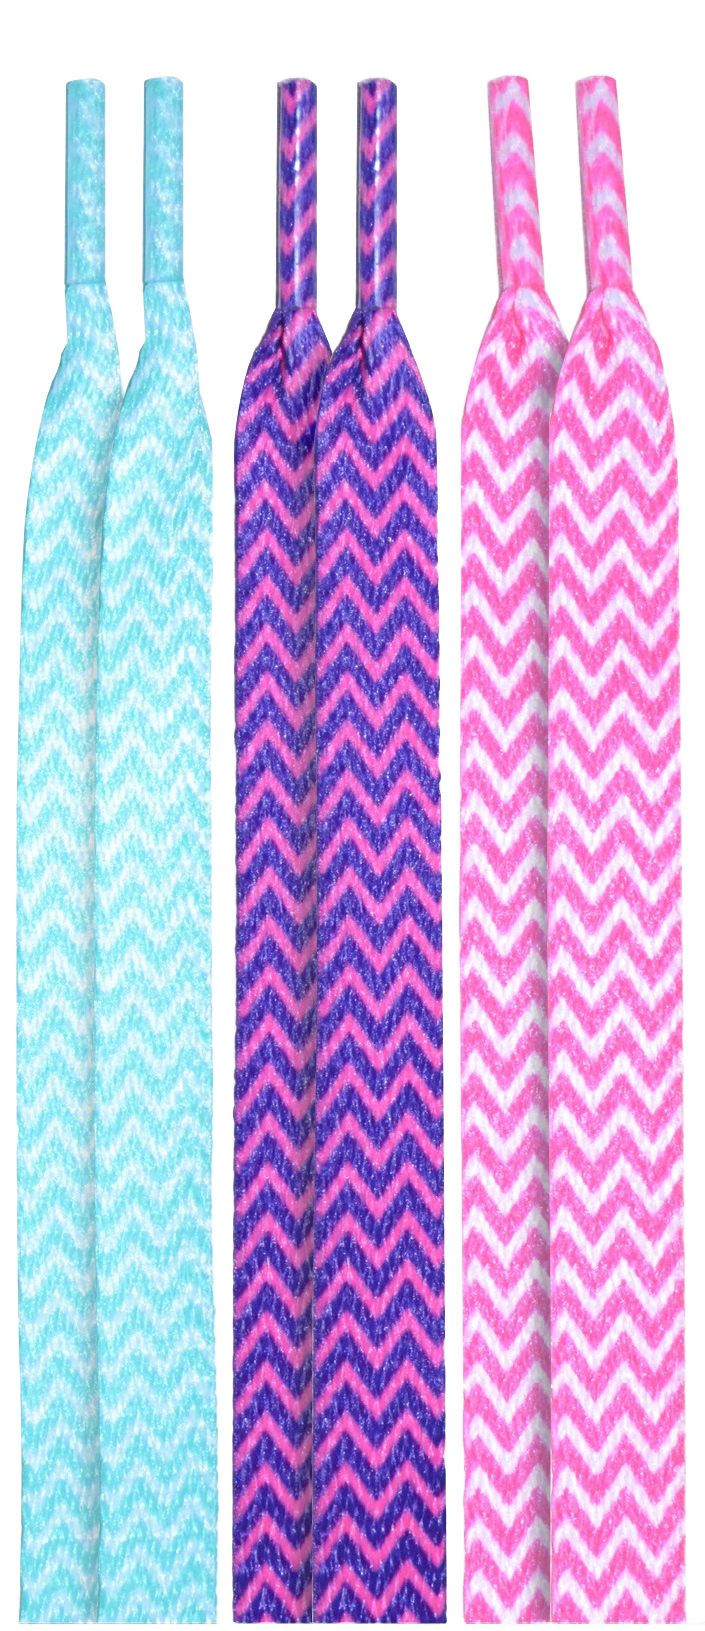 10 Seconds ® Athletic Flat Laces | Teal/Purple/Pink Chevron Printed - 3 Pack